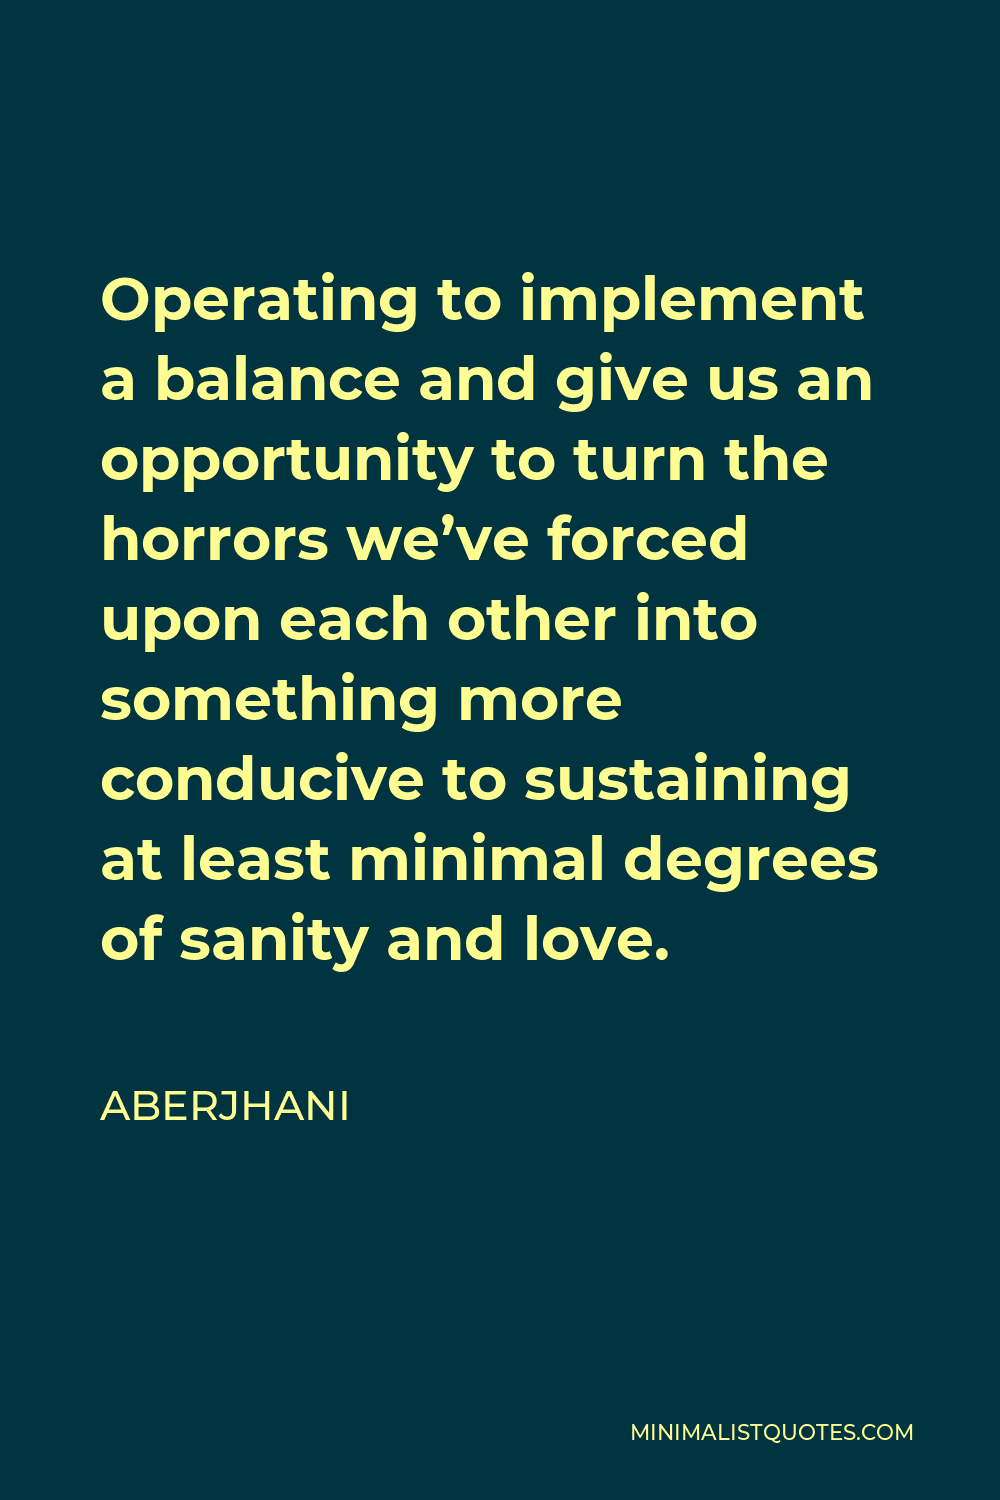 Aberjhani Quote - Operating to implement a balance and give us an opportunity to turn the horrors we’ve forced upon each other into something more conducive to sustaining at least minimal degrees of sanity and love.